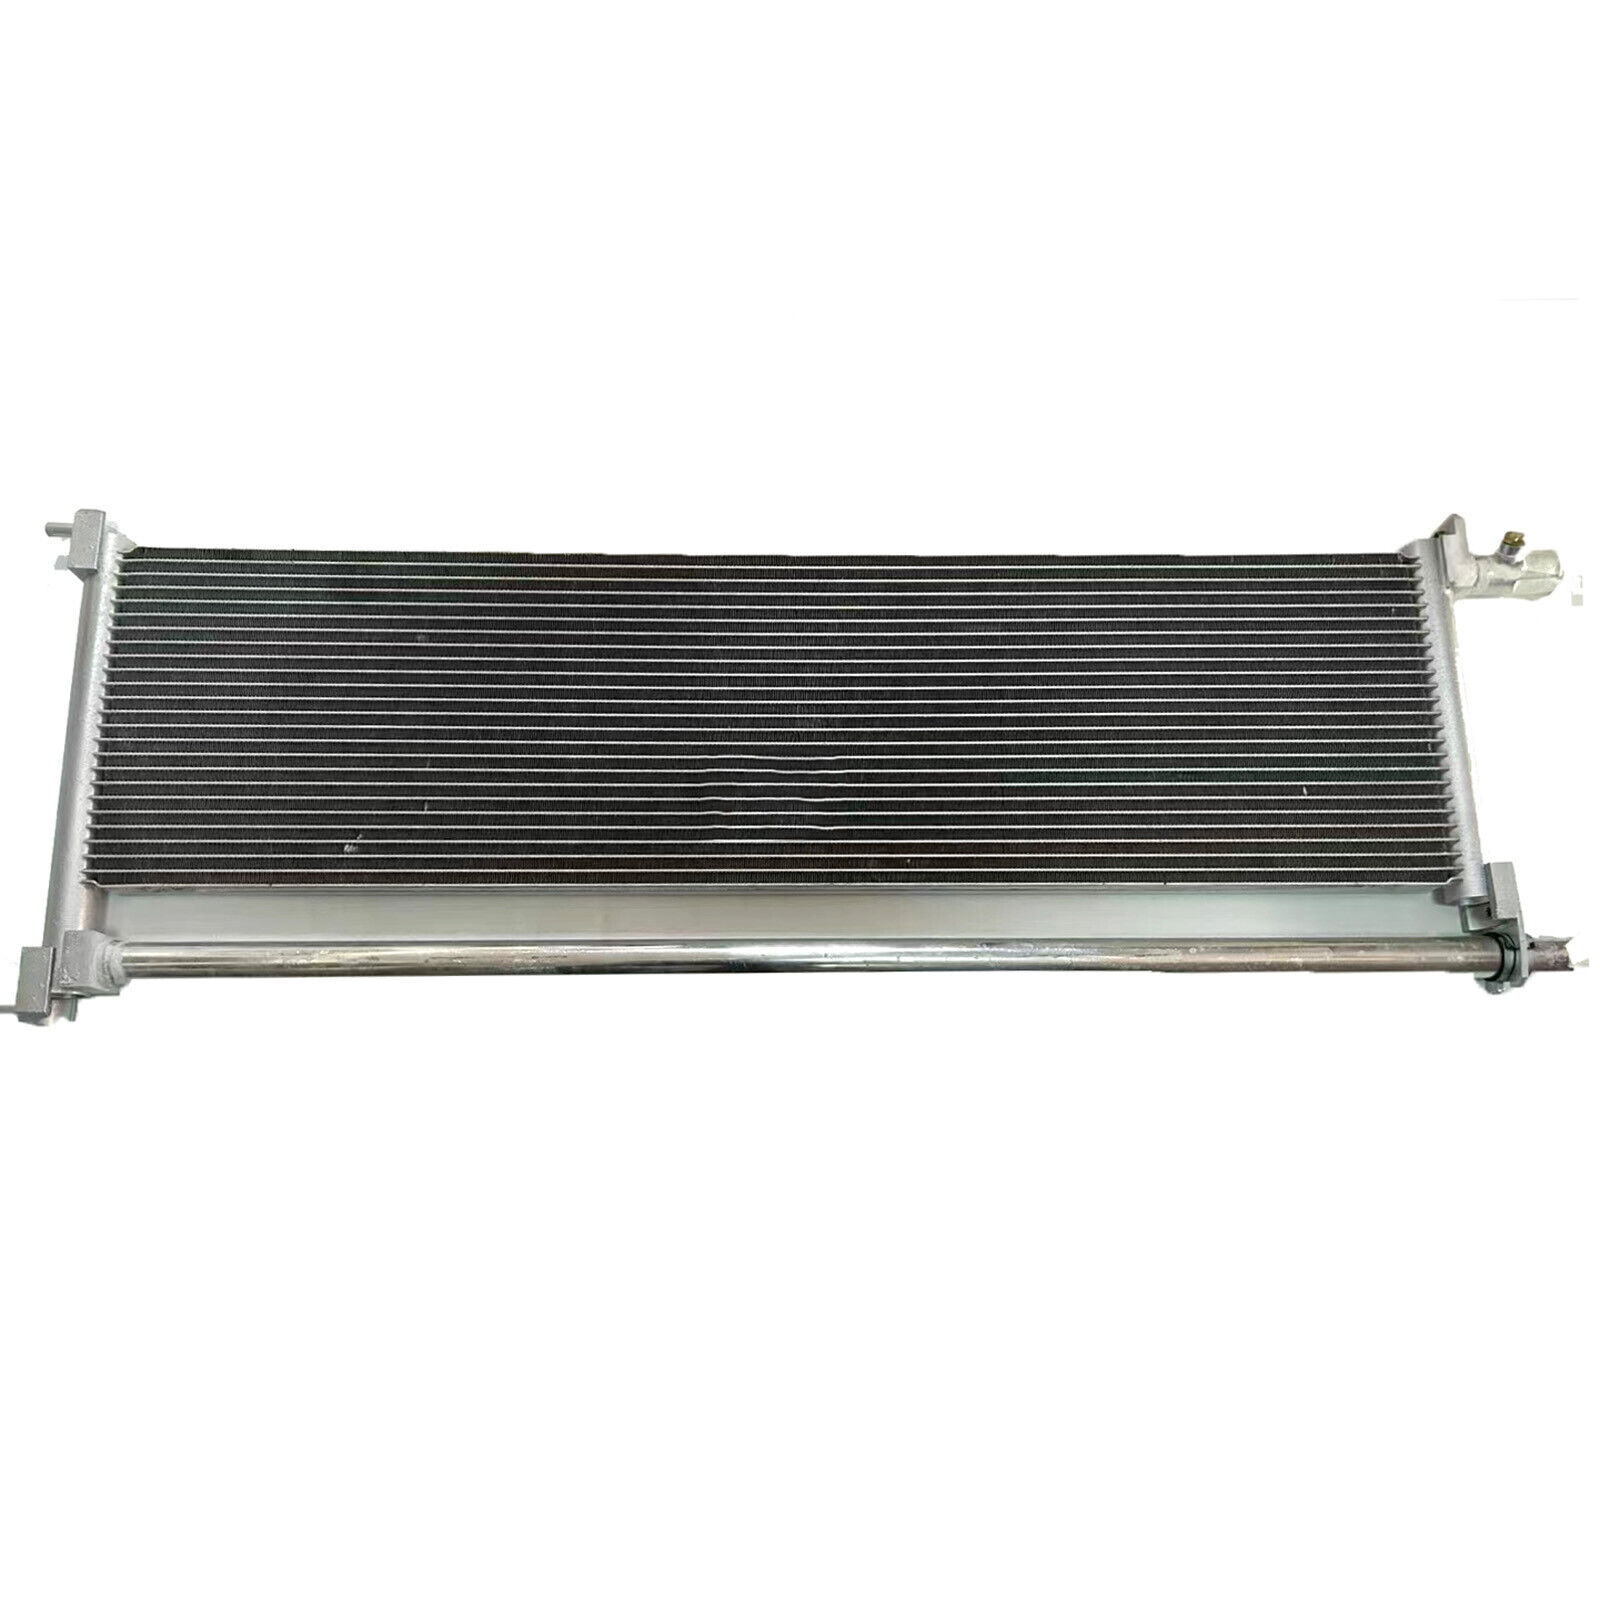 (67-3054) Radiator Coil Thermo King T-Series